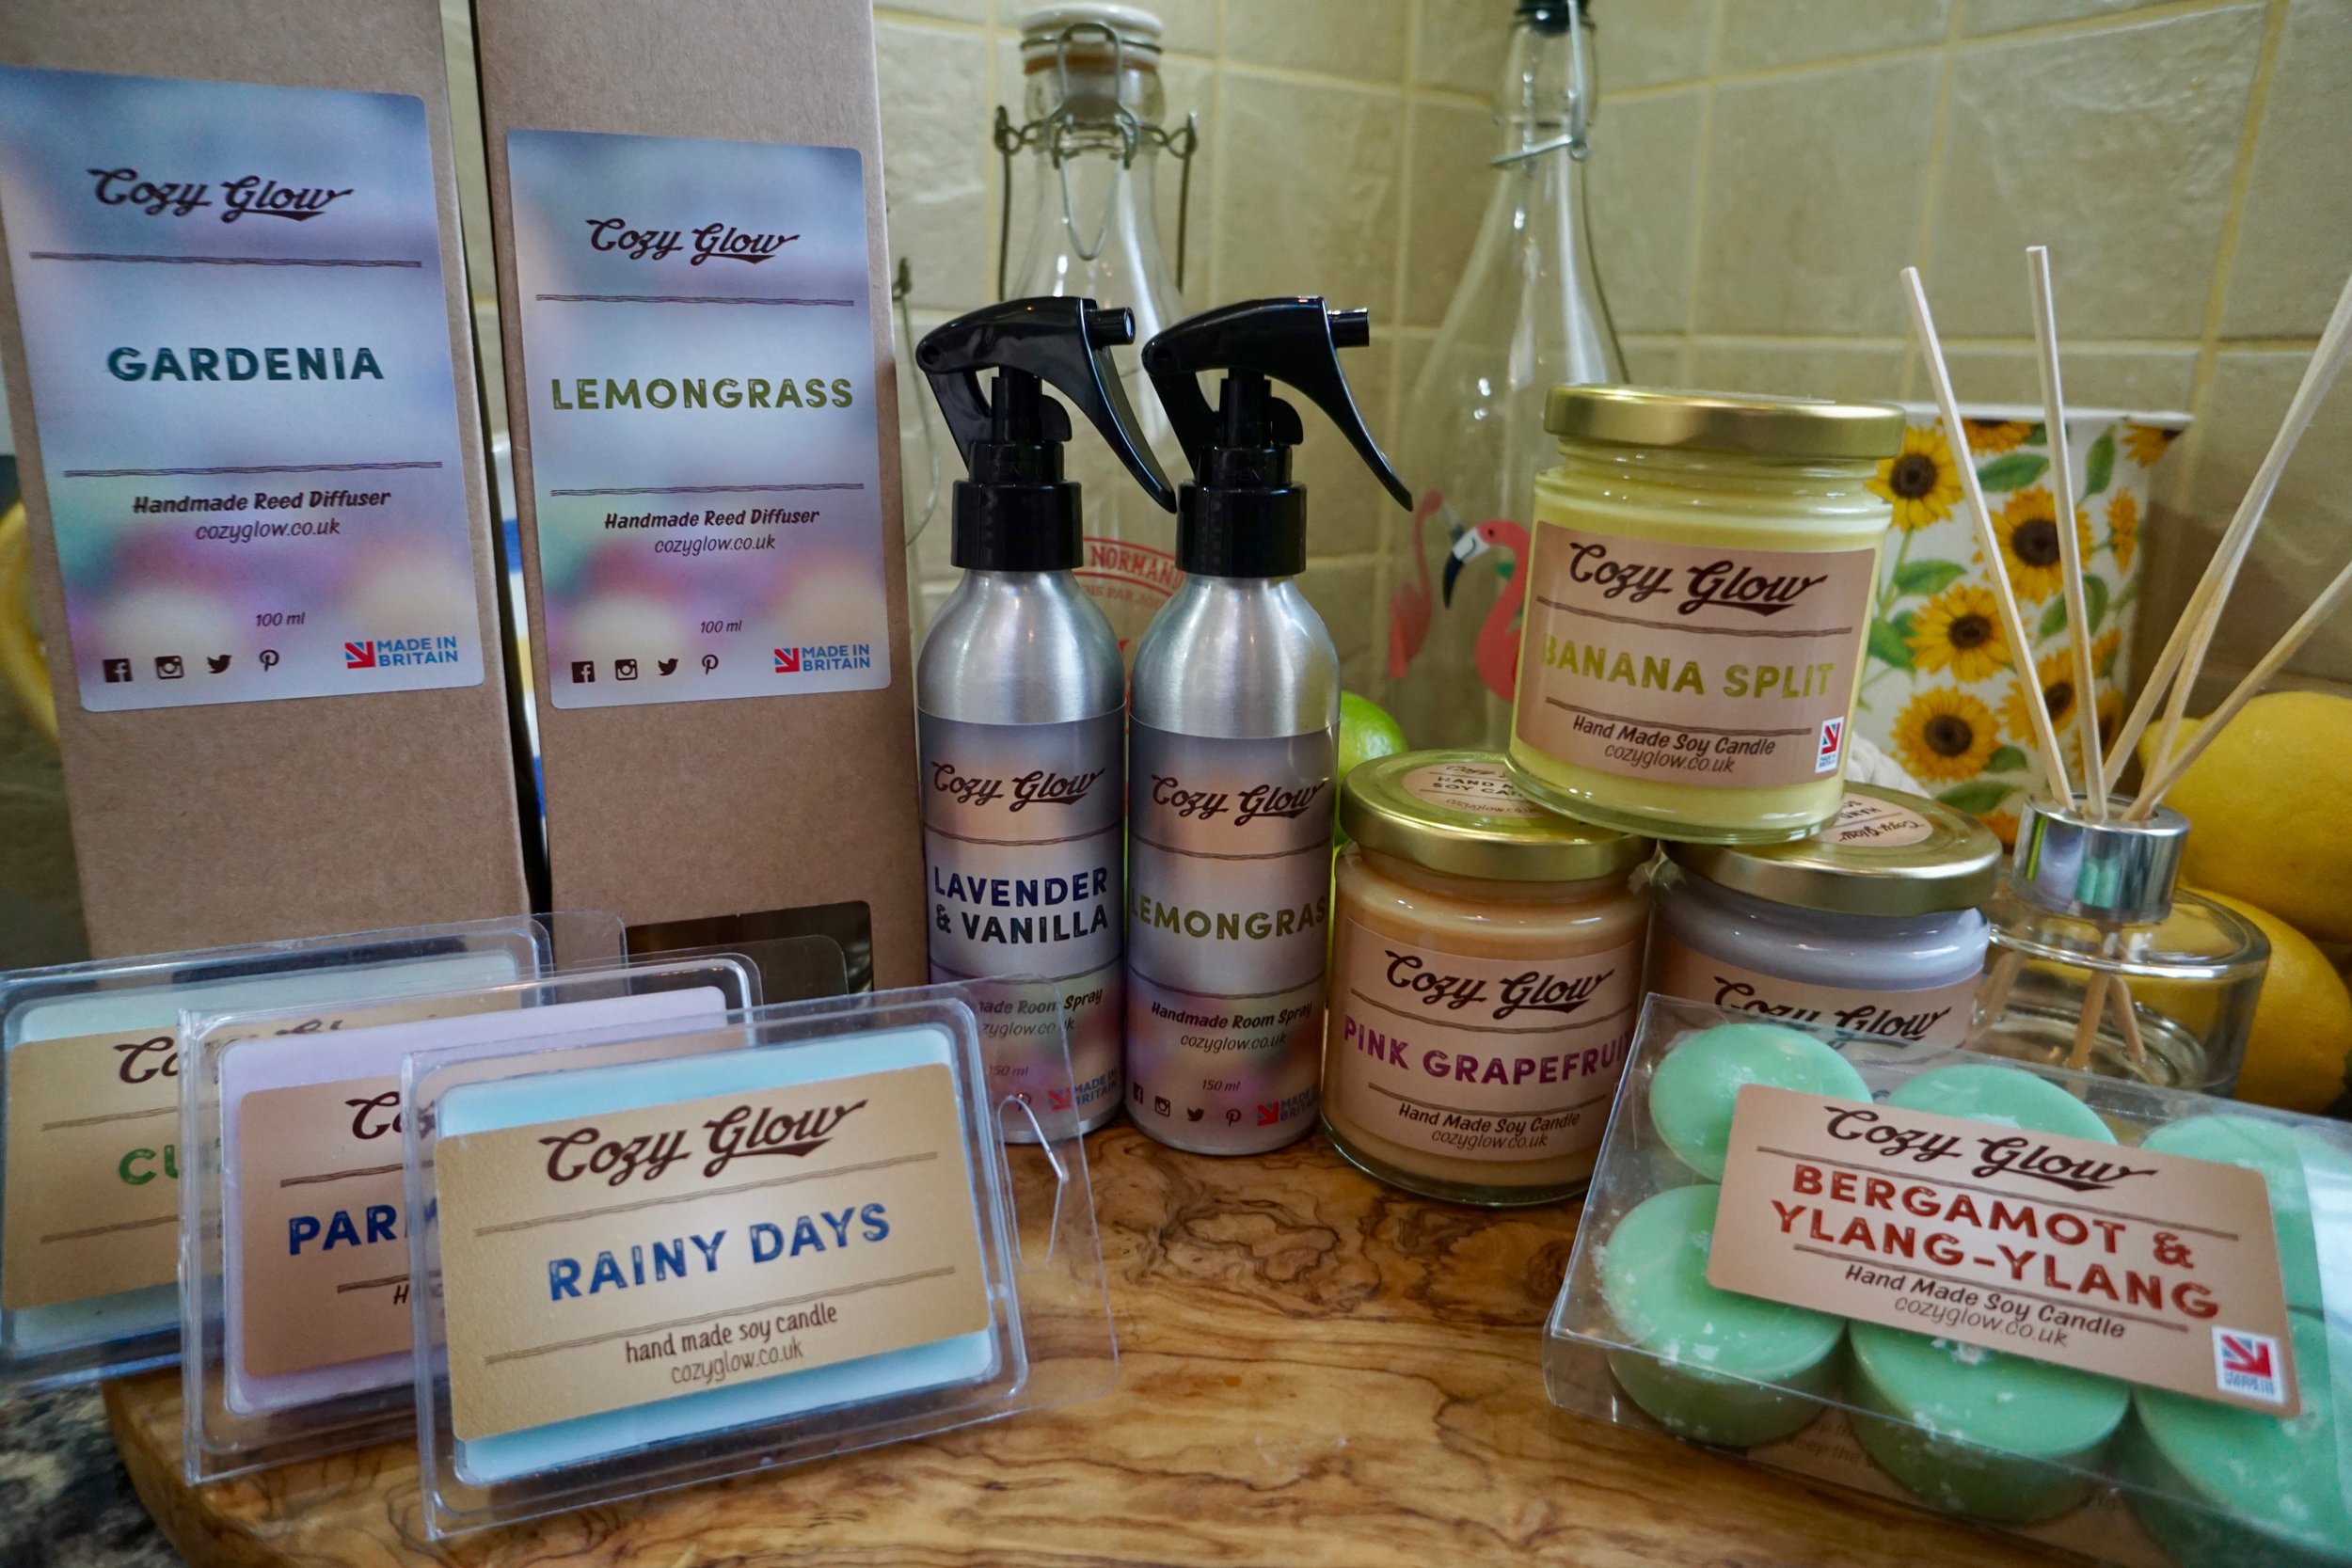 Cozy Glow Wellbeing Products and Candle Maker in Croydon South London Club Card 3.jpg